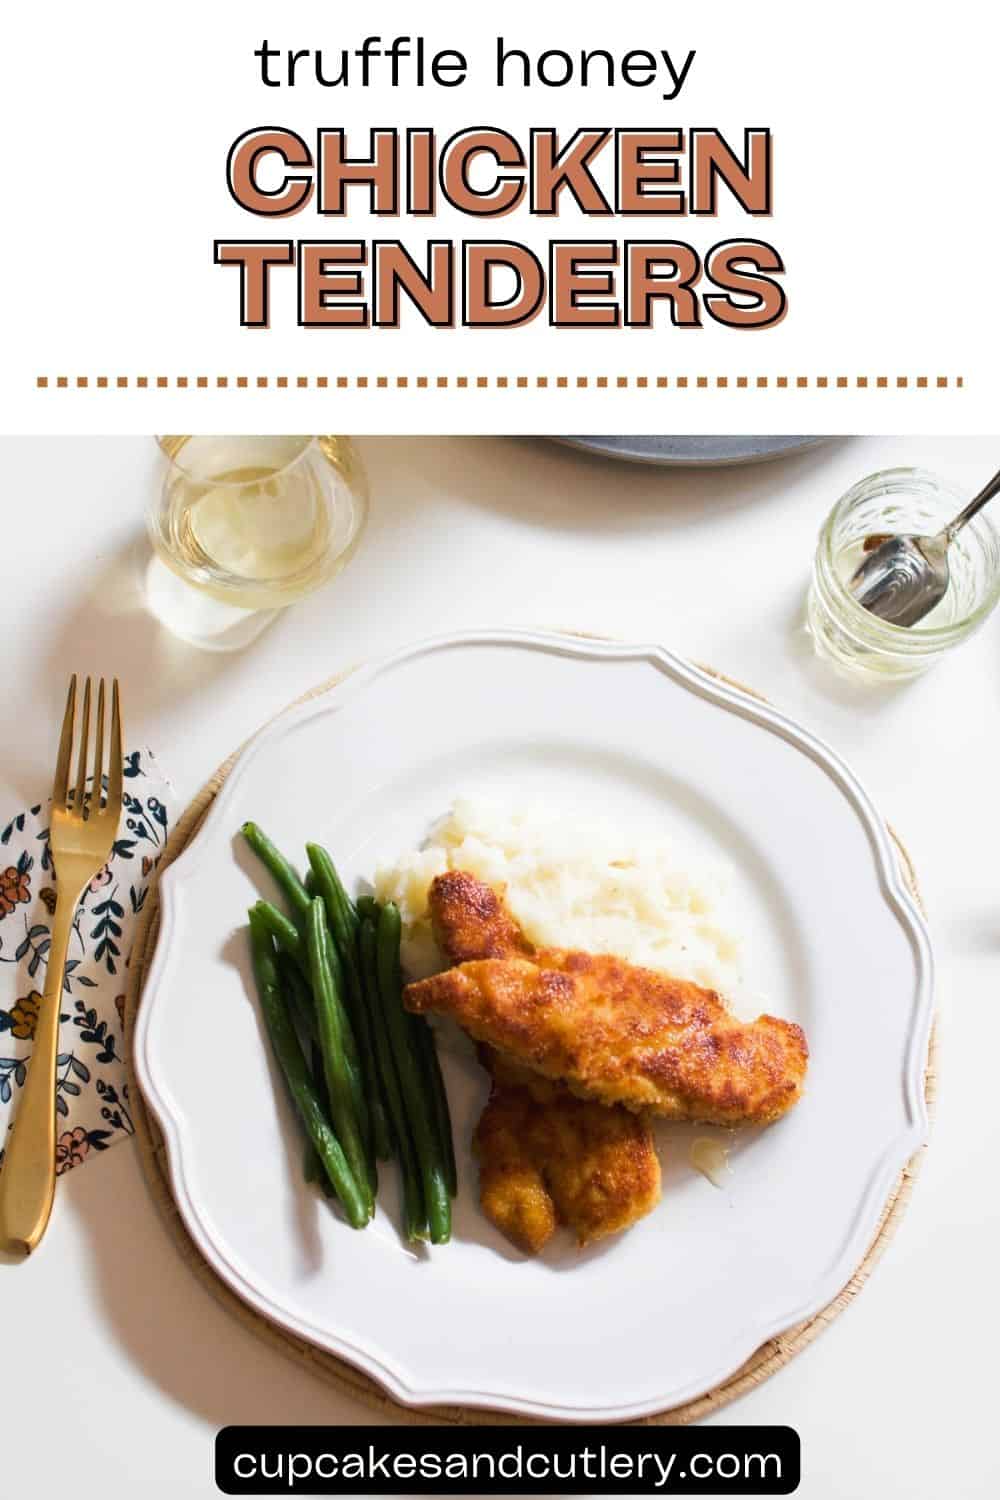 Text: Truffle Honey Chicken Tenders with a white plate holding two chicken tenders drizzled with Truffle Honey next to green beans and mashed potatoes on a dinner table.